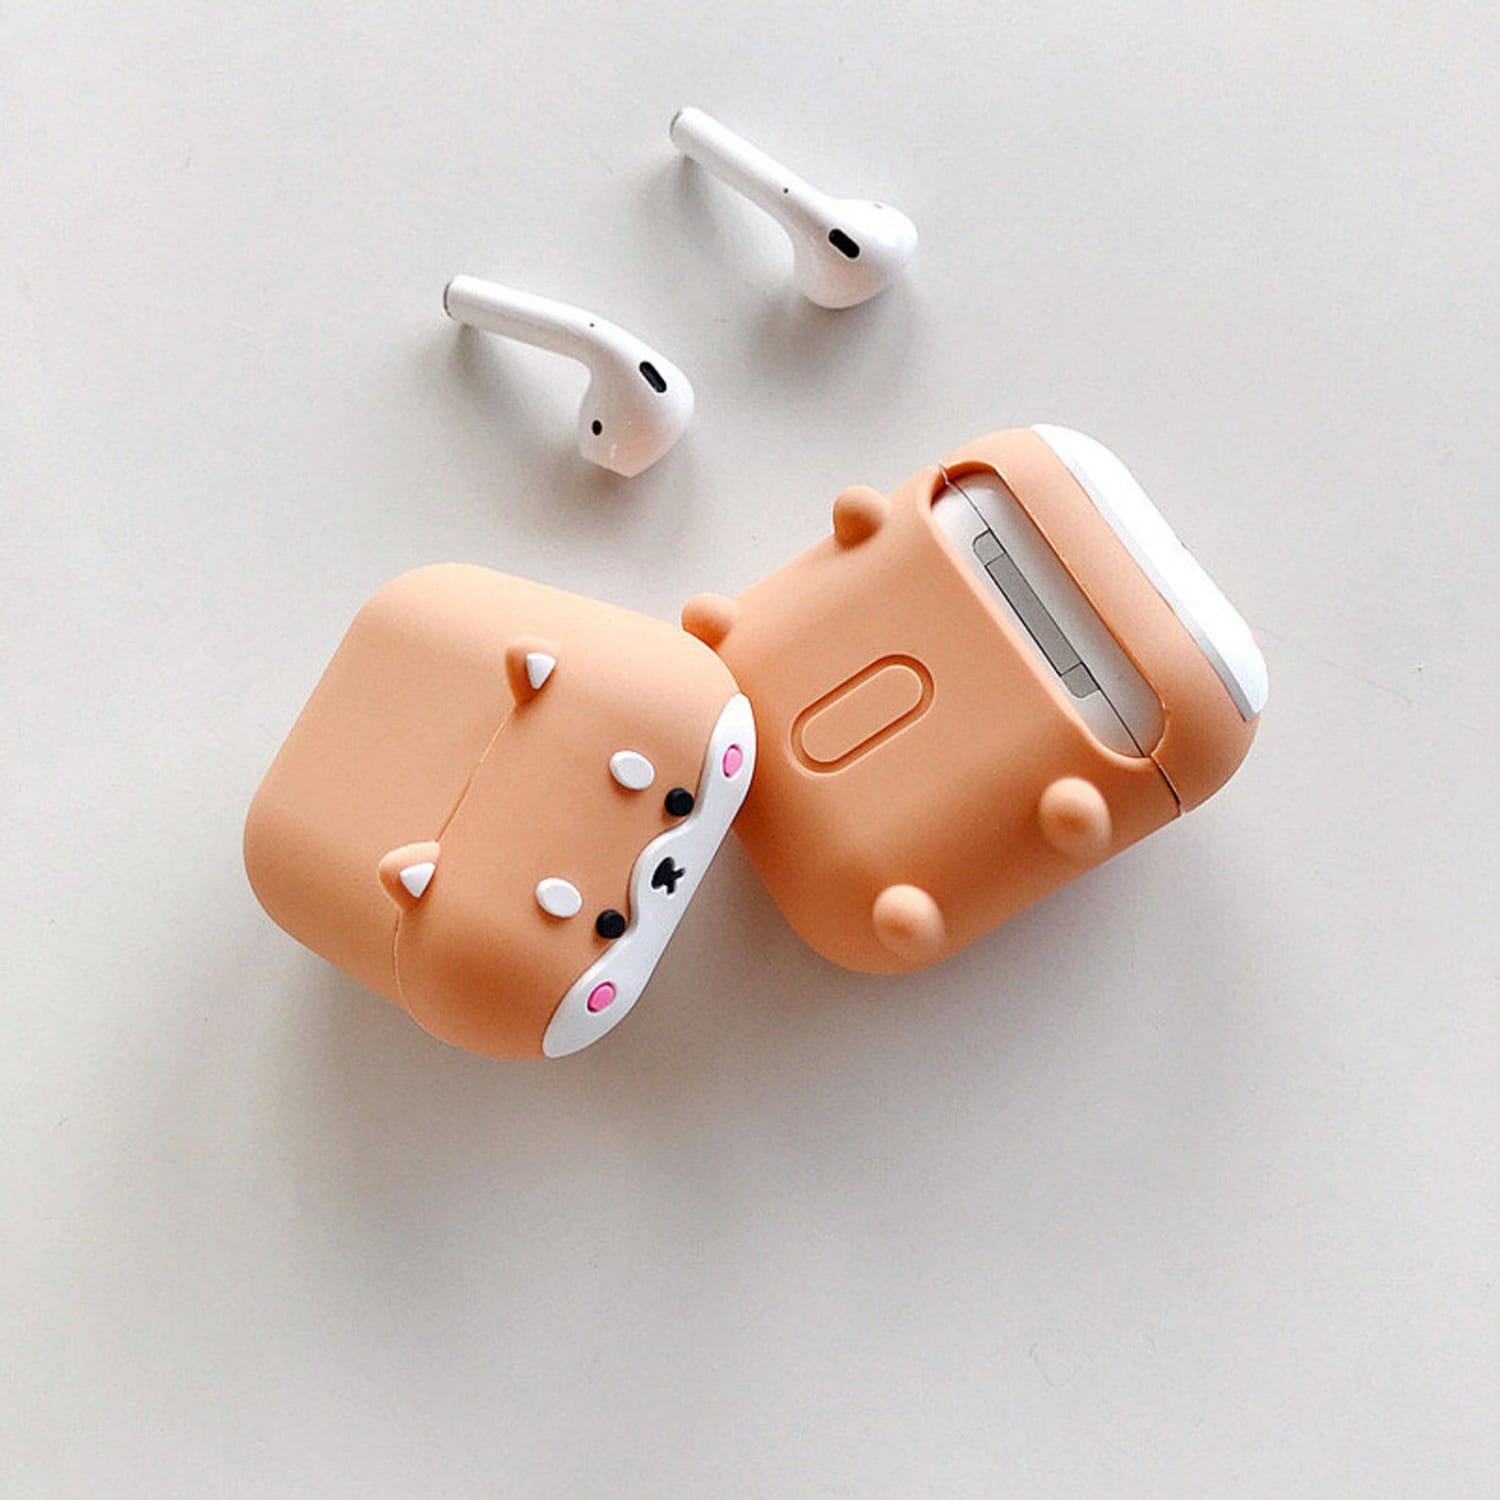 IS THIS THE MOST STYLISH AIRPOD CASE EVER?